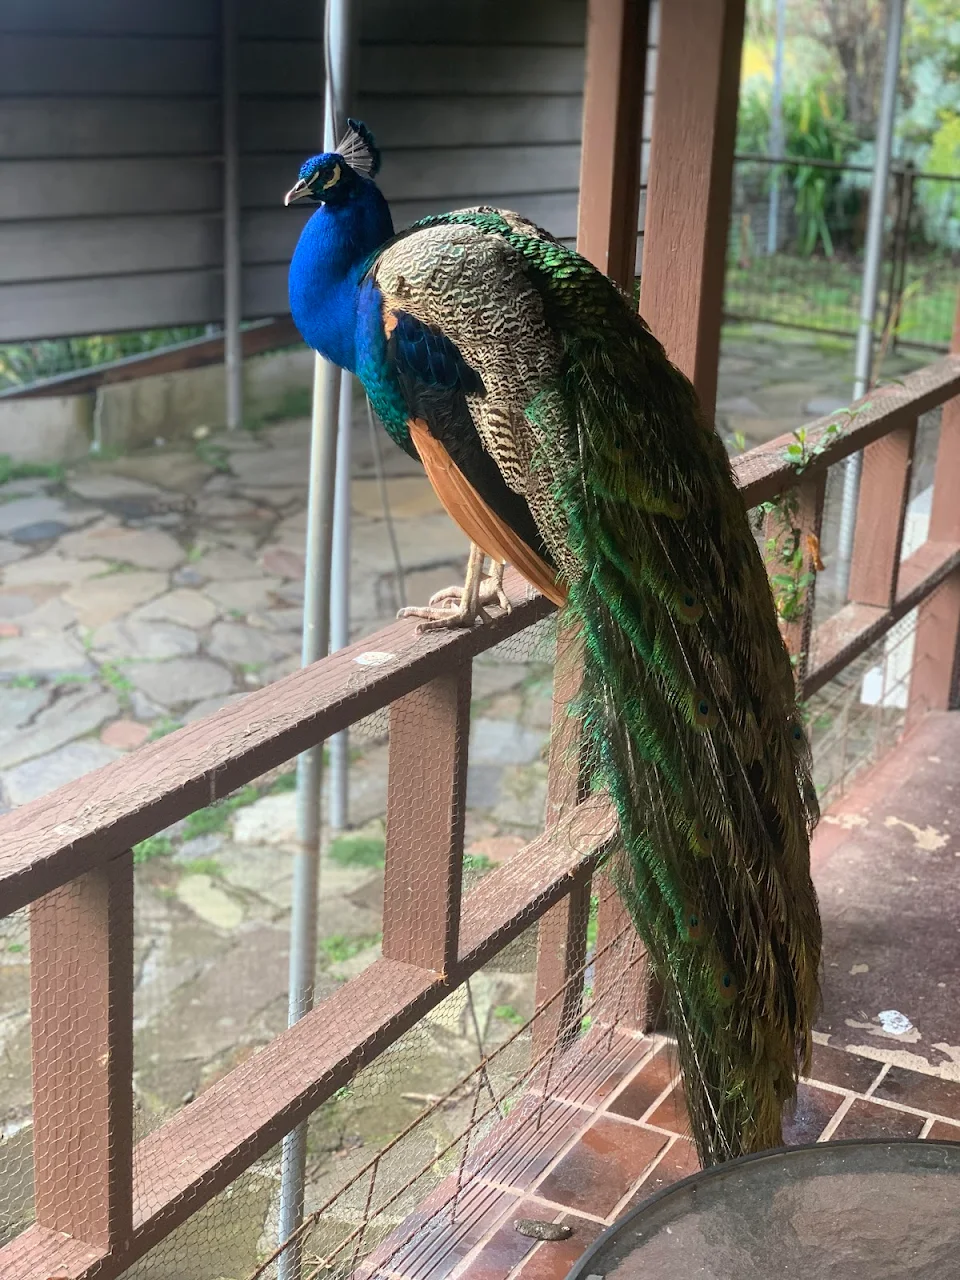 This peacock Landed on the porch of the place I was staying at